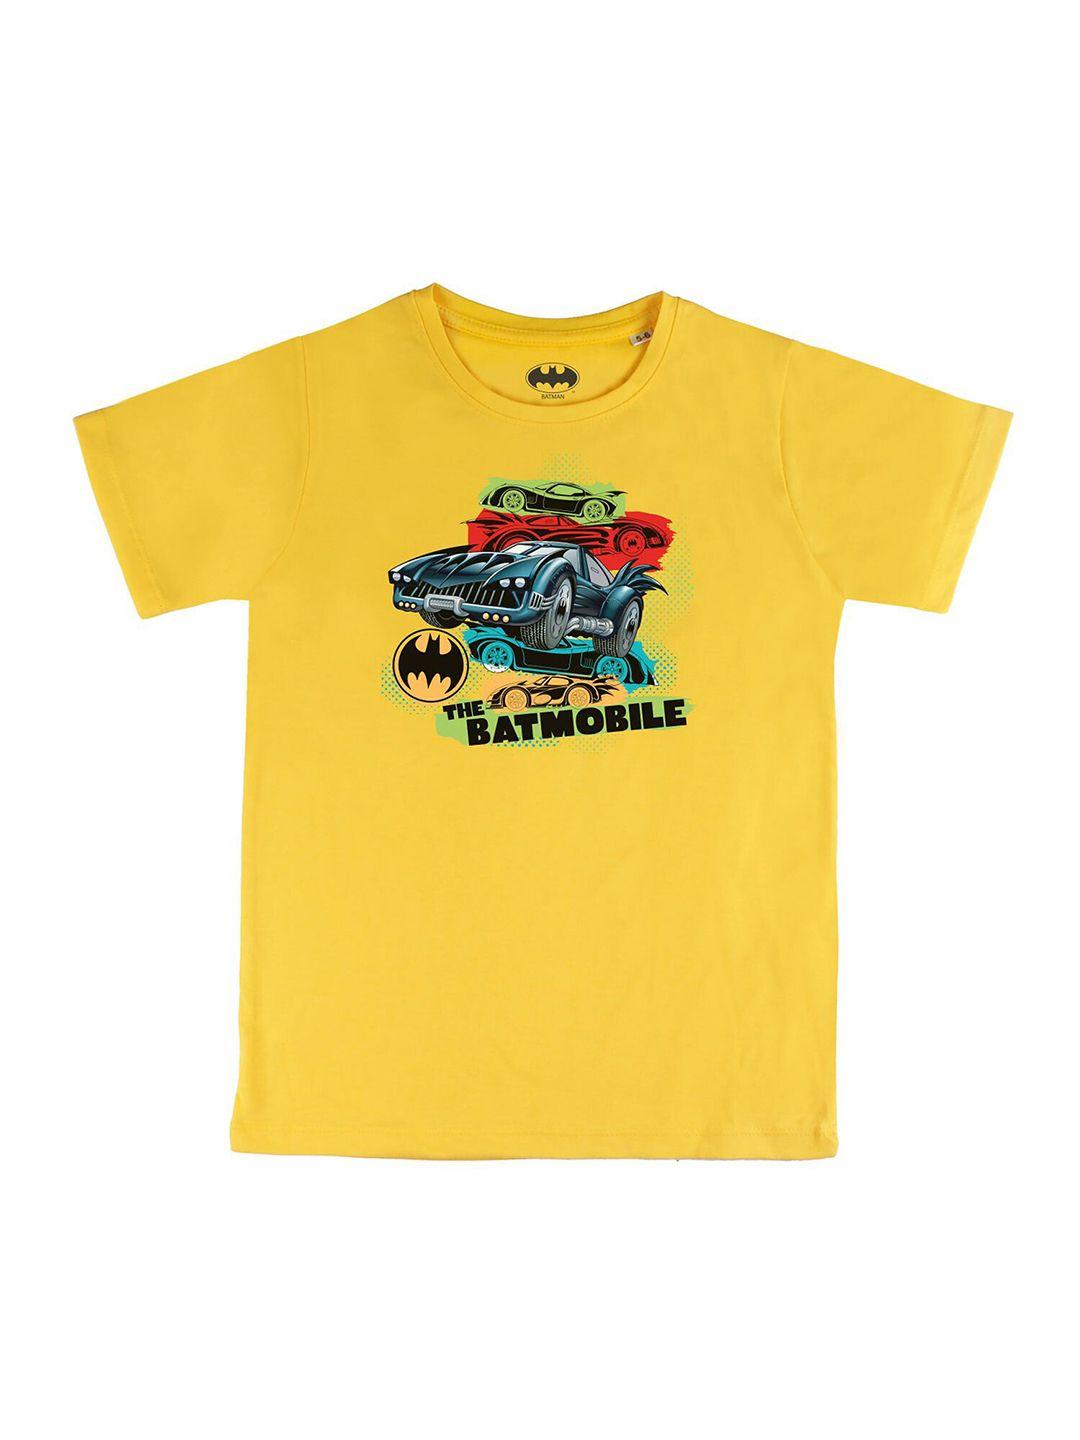 dc by wear your mind boys yellow batman printed pure cotton t-shirt